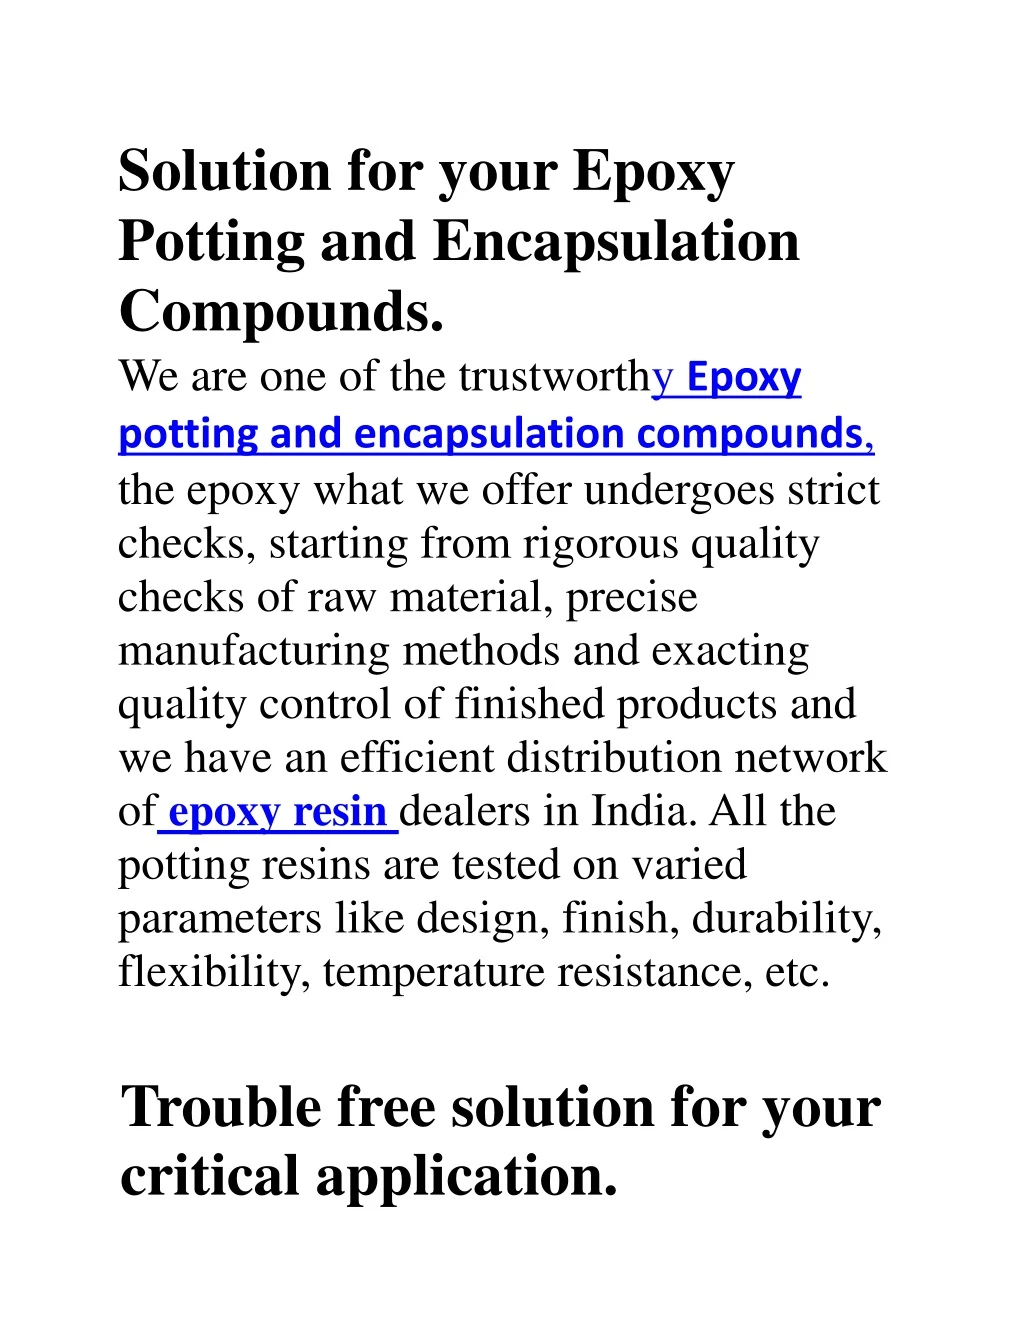 solution for your epoxy potting and encapsulation